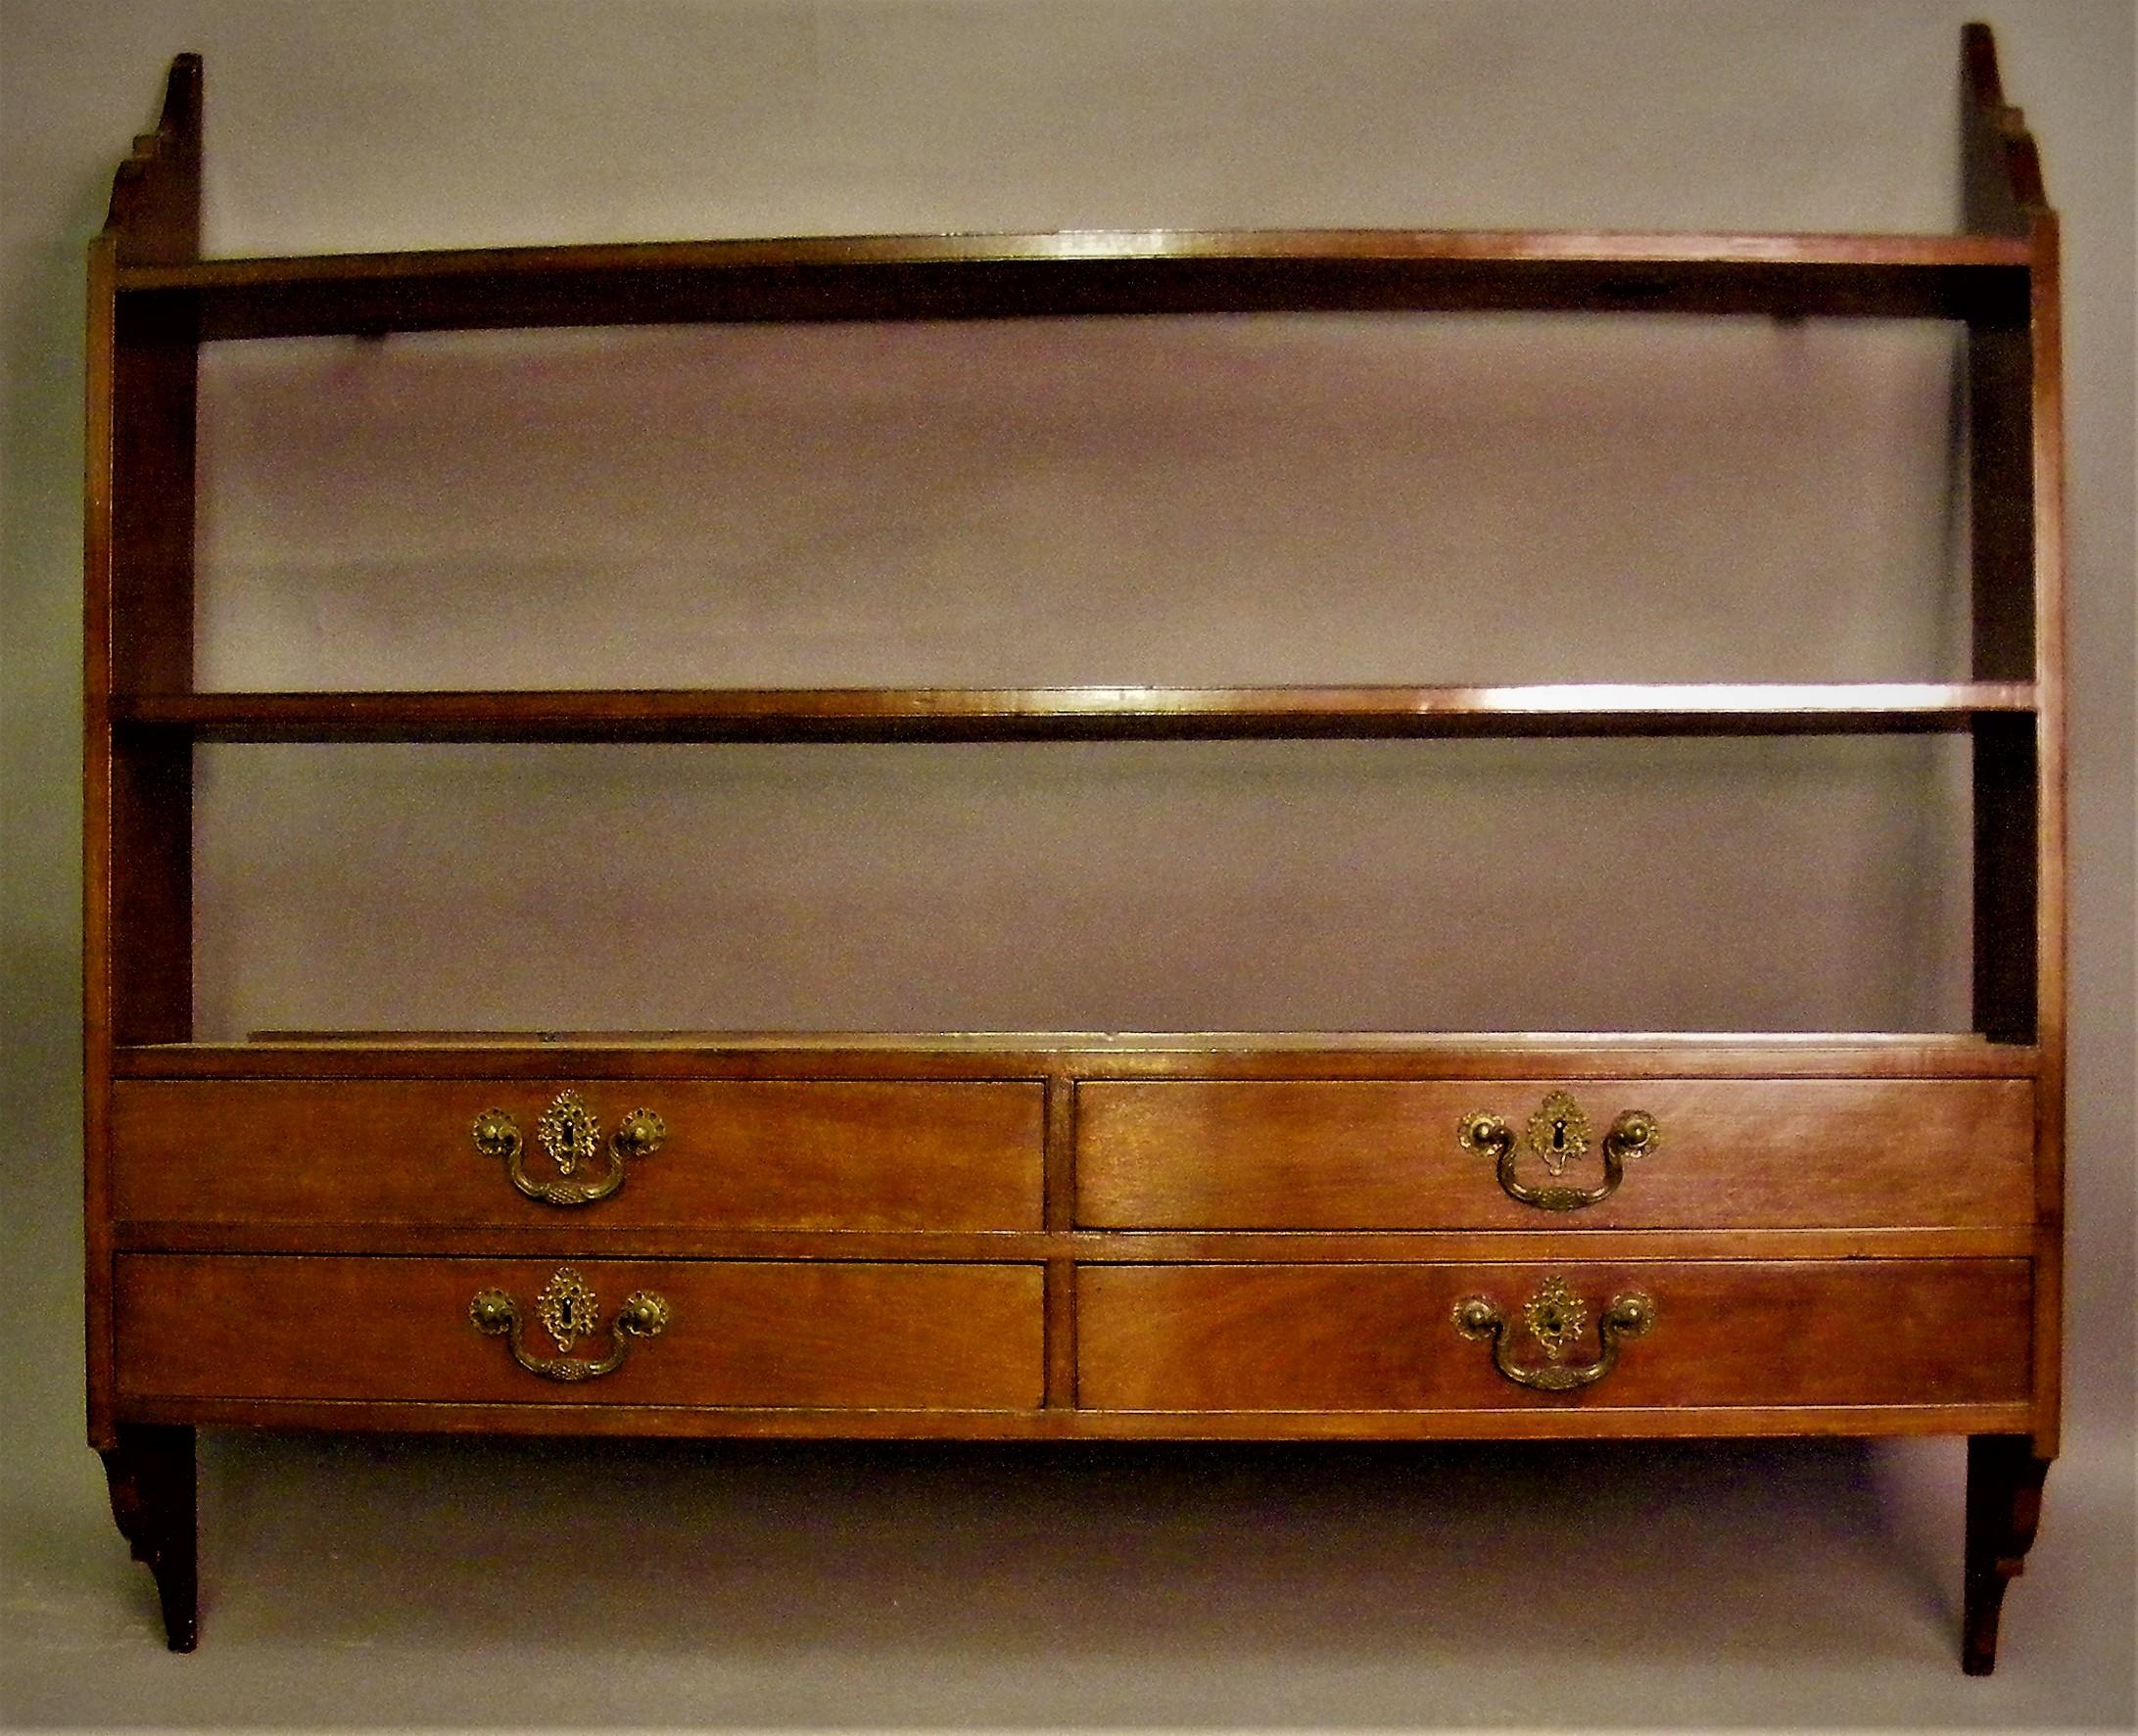 Chippendale mahogany open shelves with 4 oak lined drawers with key.